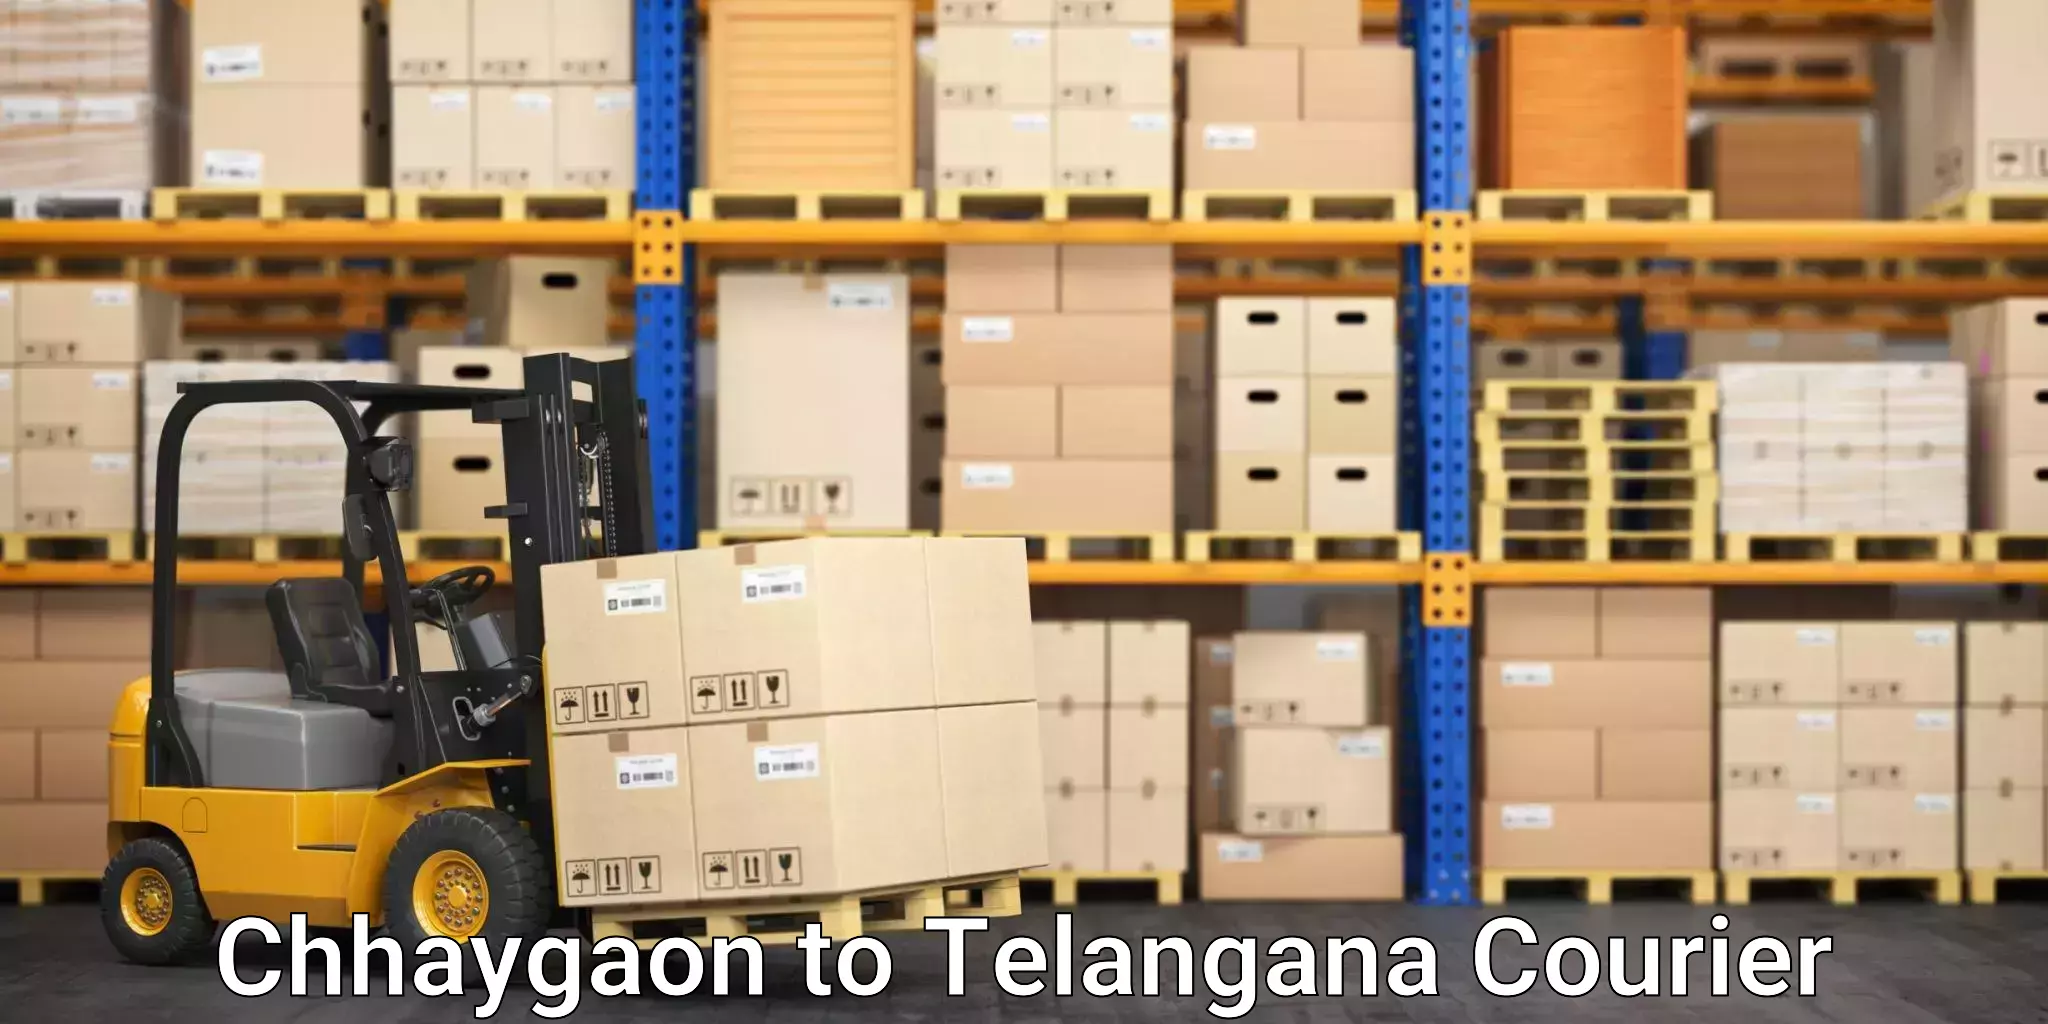 High-priority parcel service Chhaygaon to Sangareddy